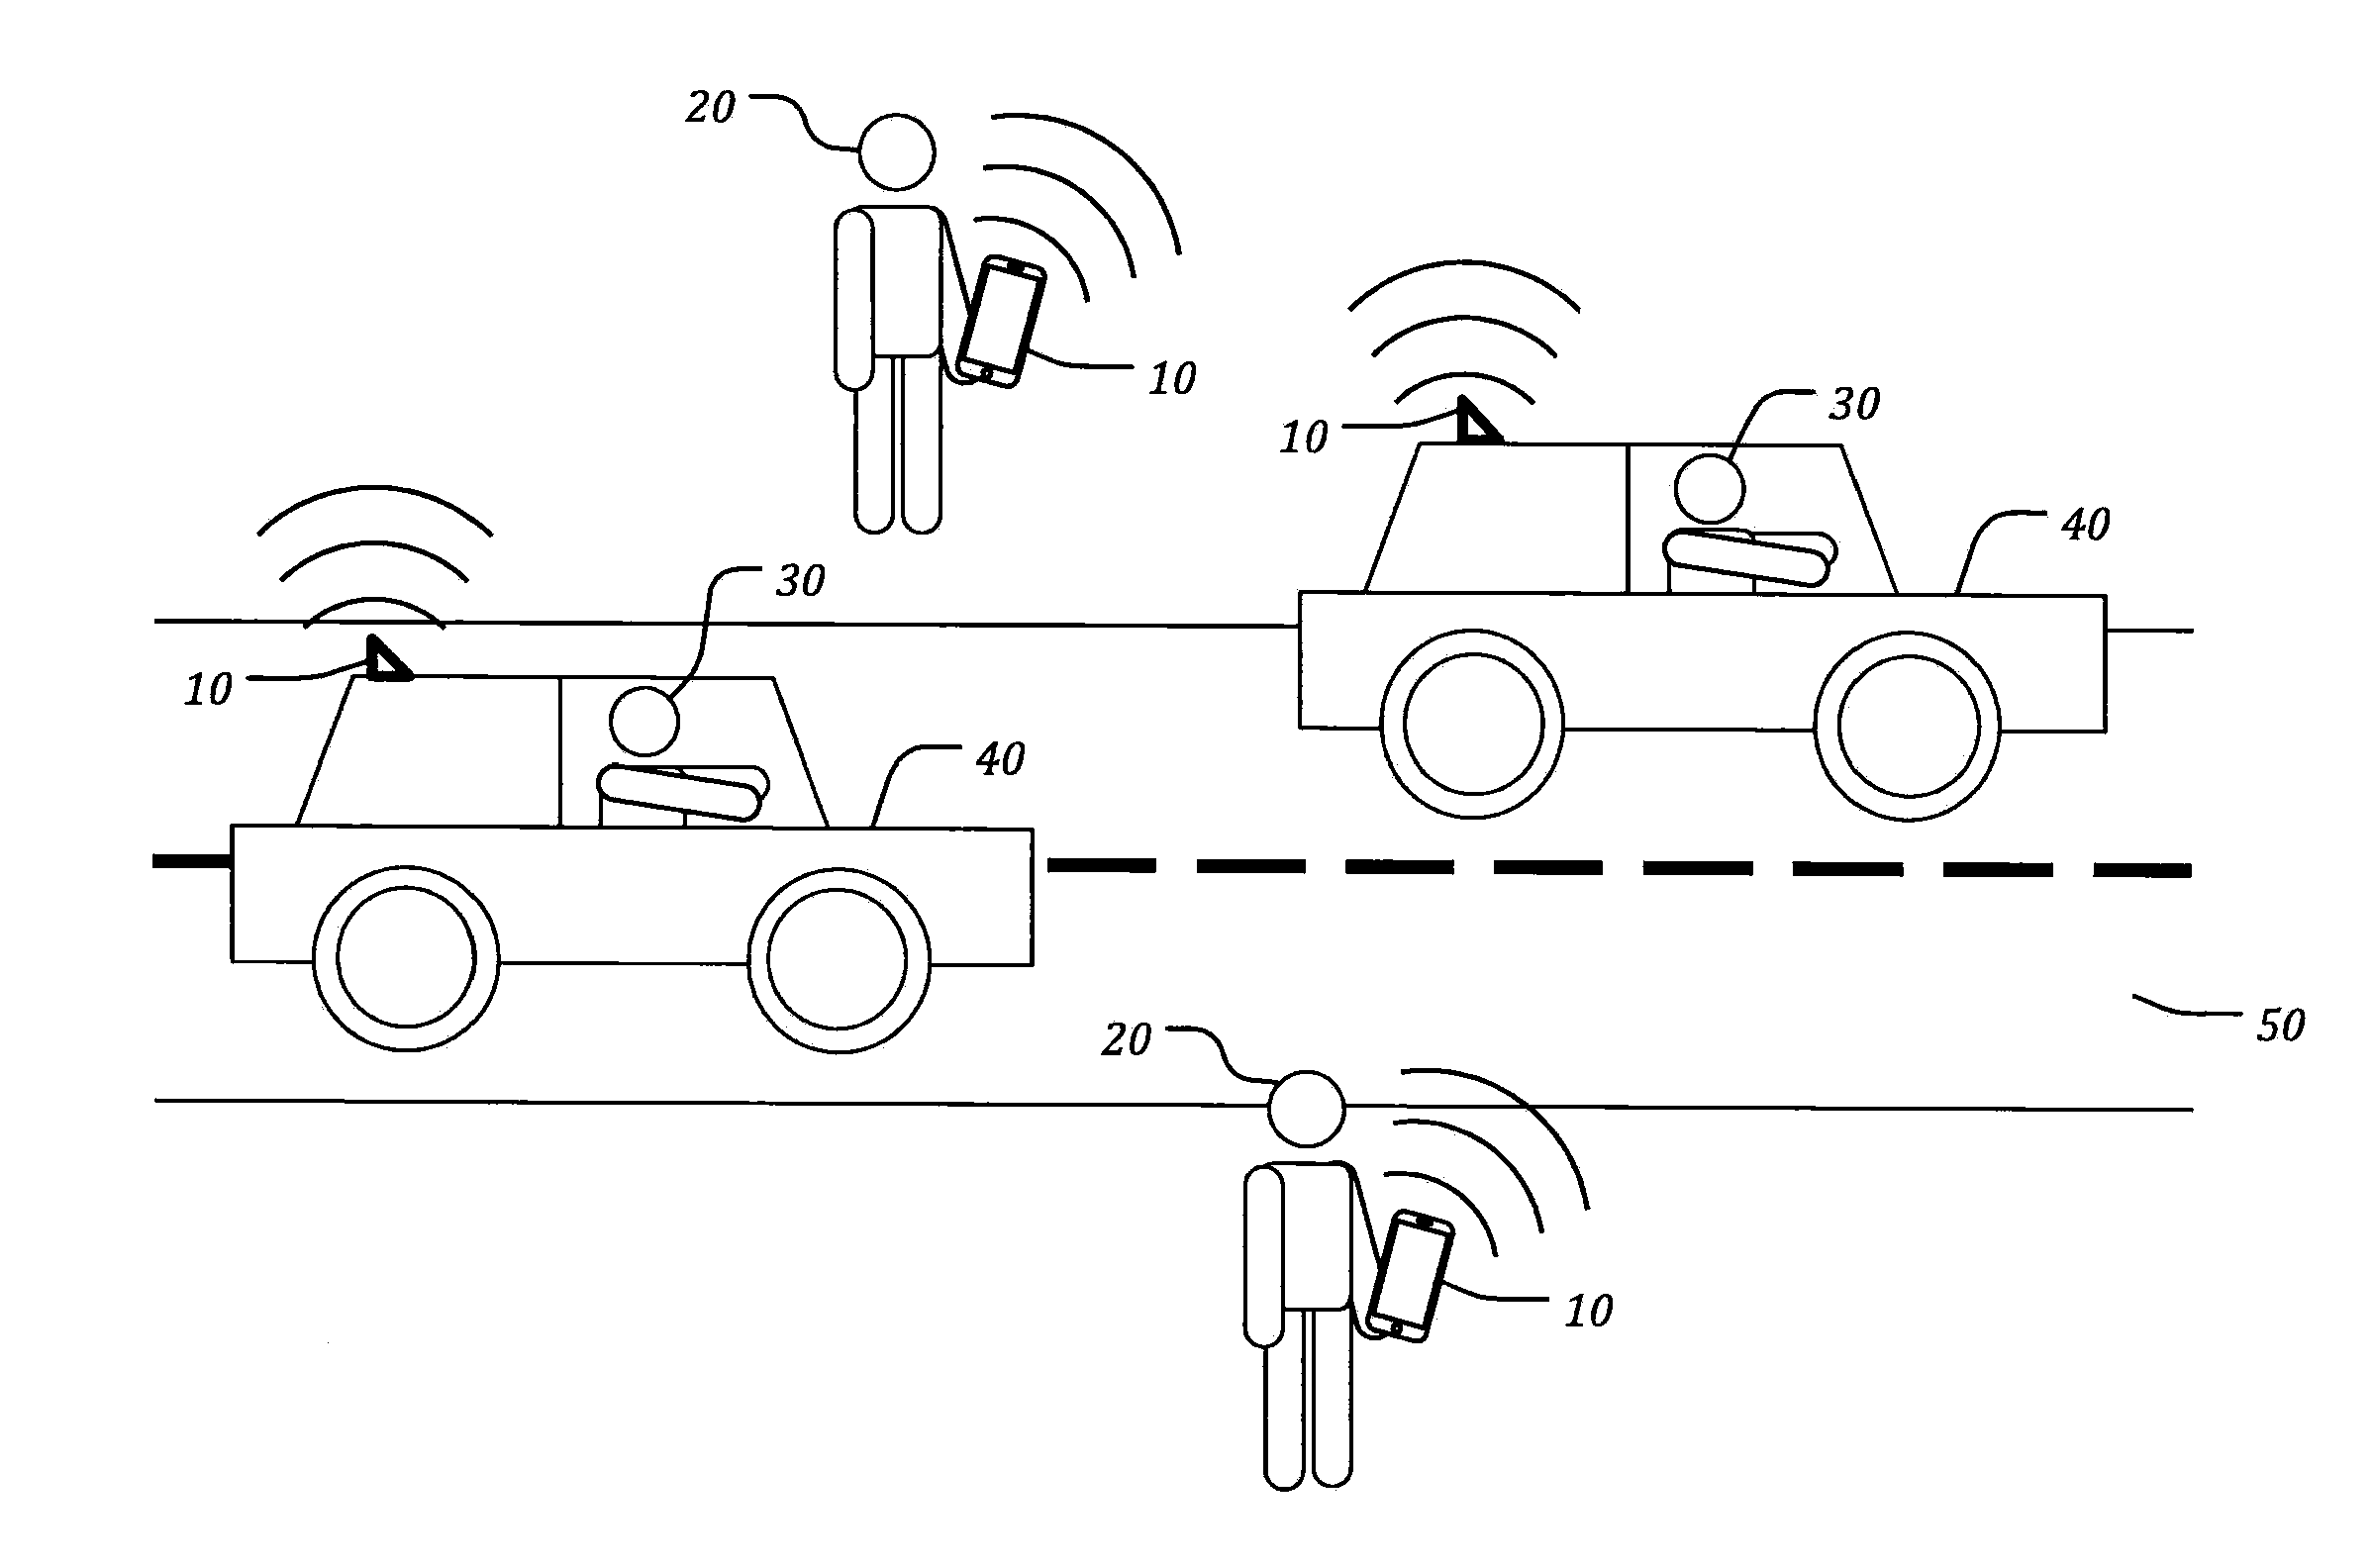 Vehicle to pedestrian communication system and method